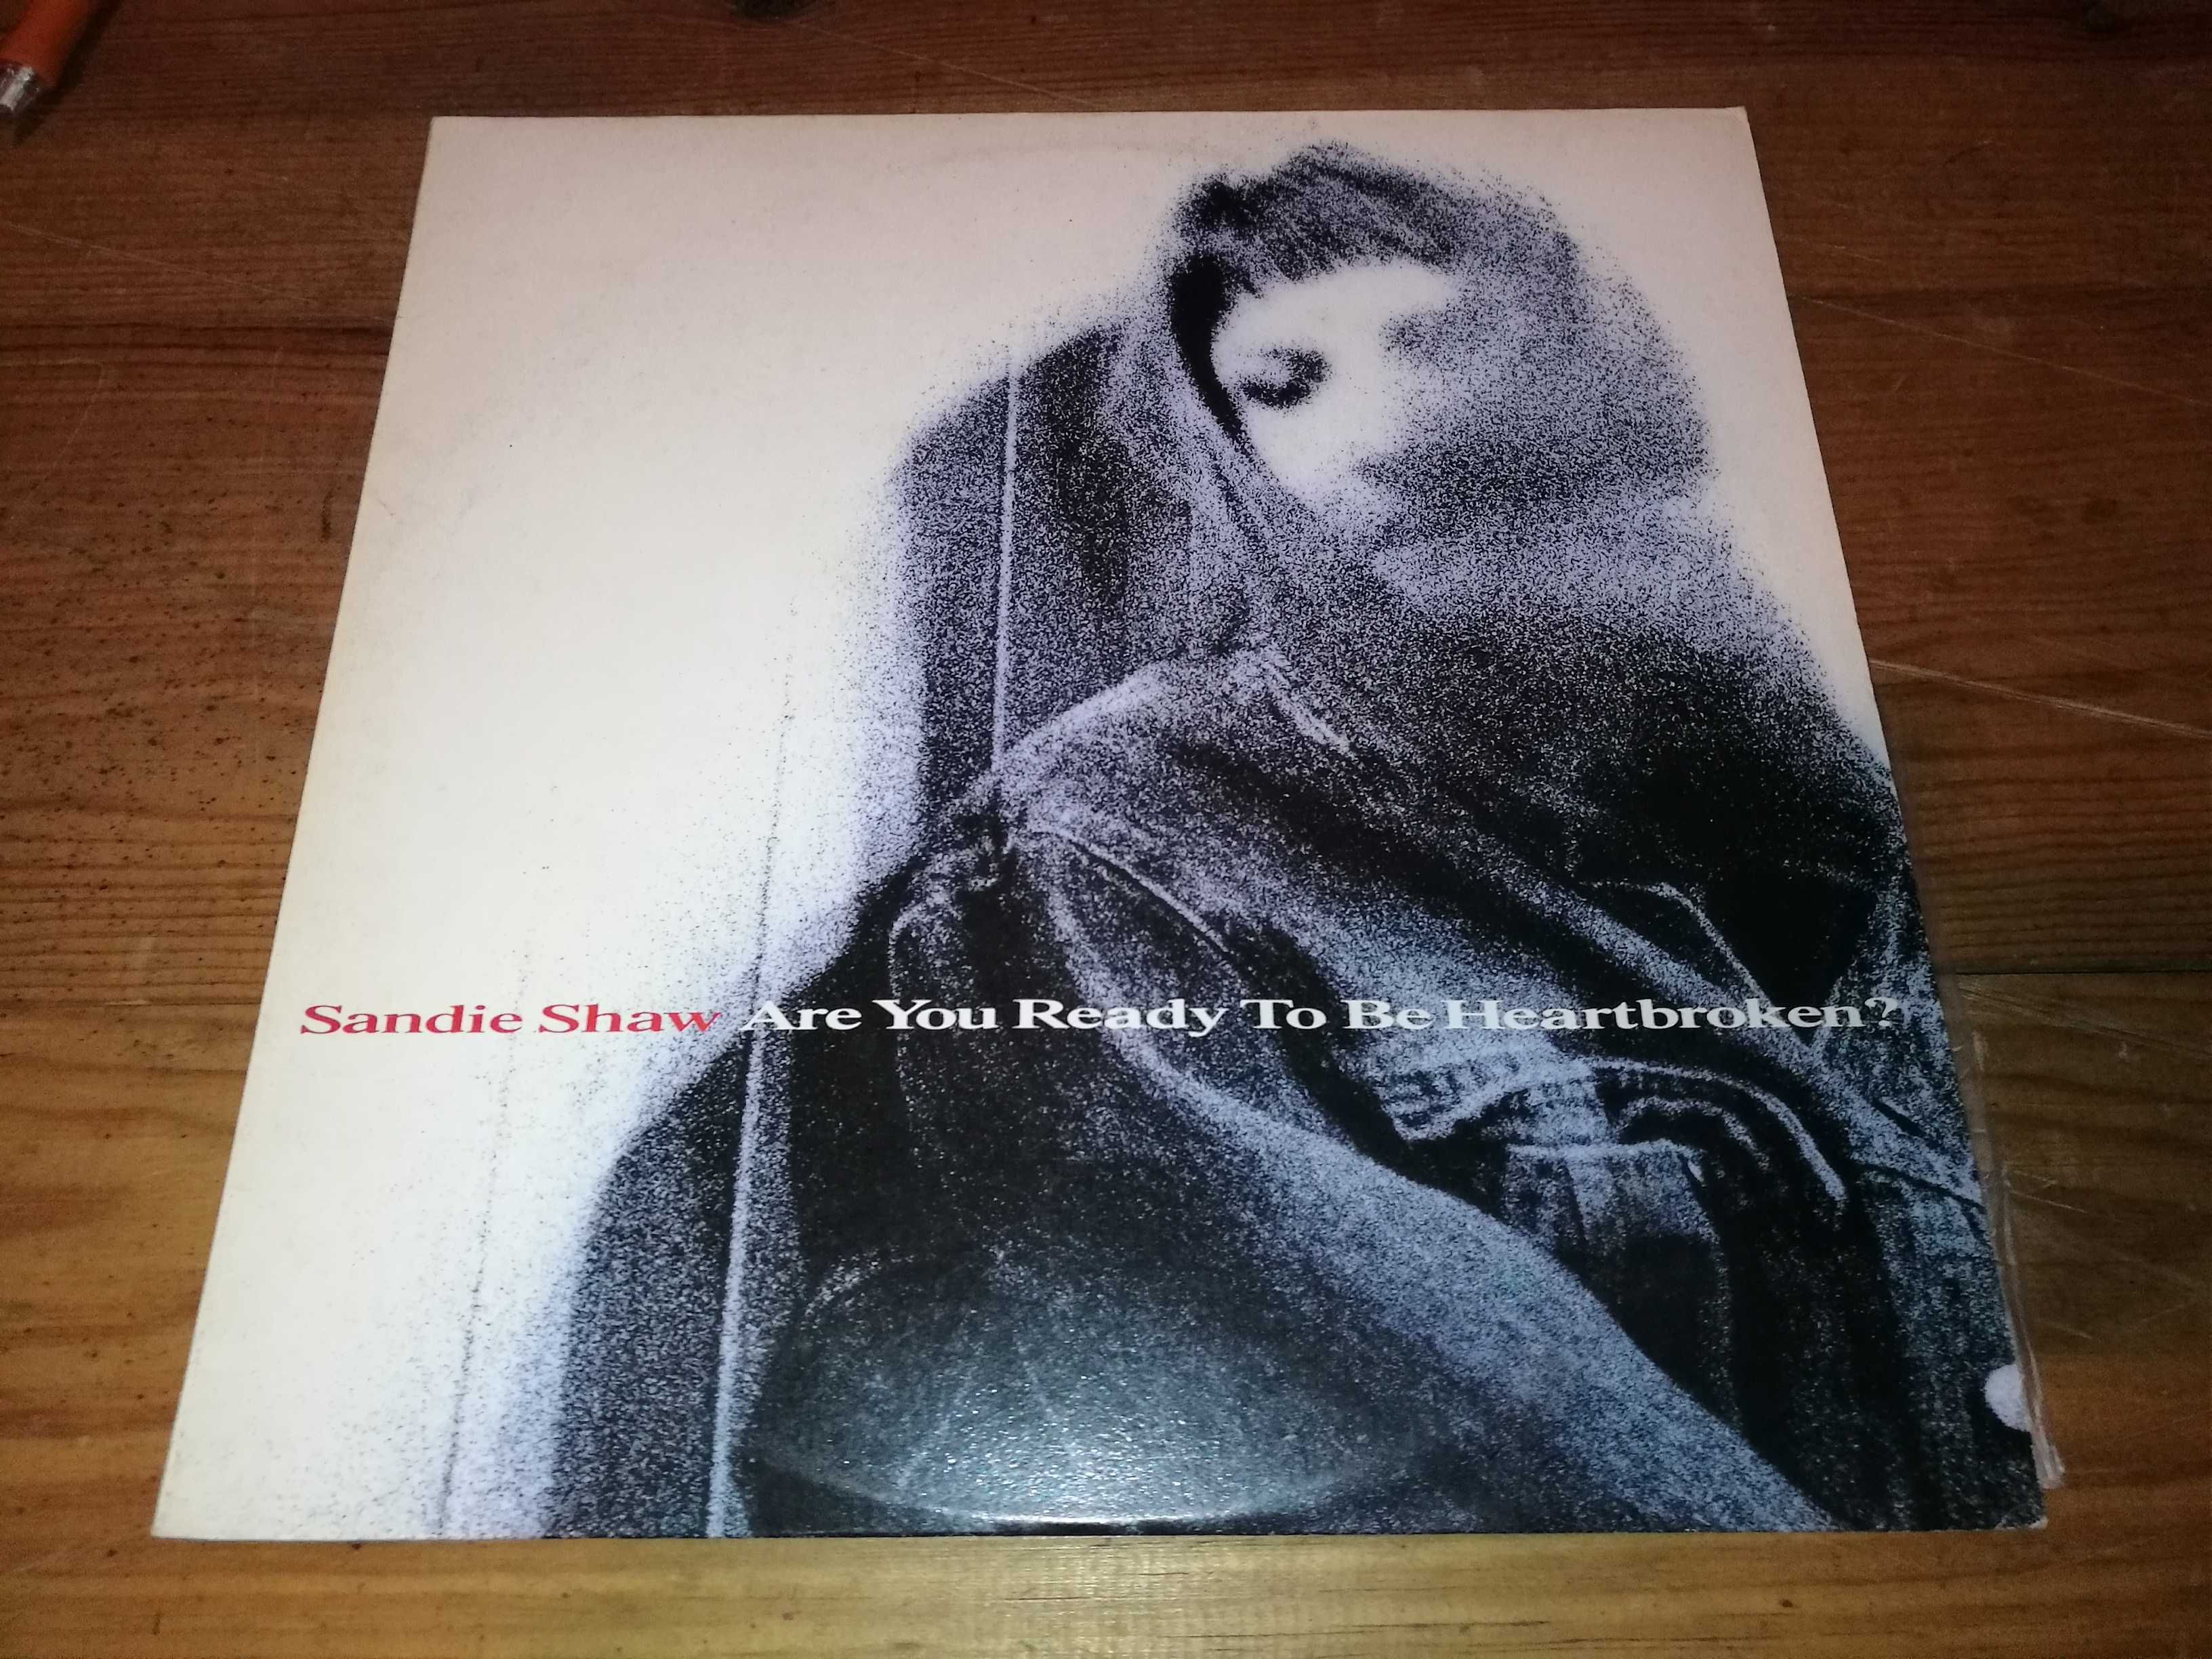 SANDIE SHAW -Are You Ready To Be a Heartbroken?(Smiths/Lloyd Cole)MAXI